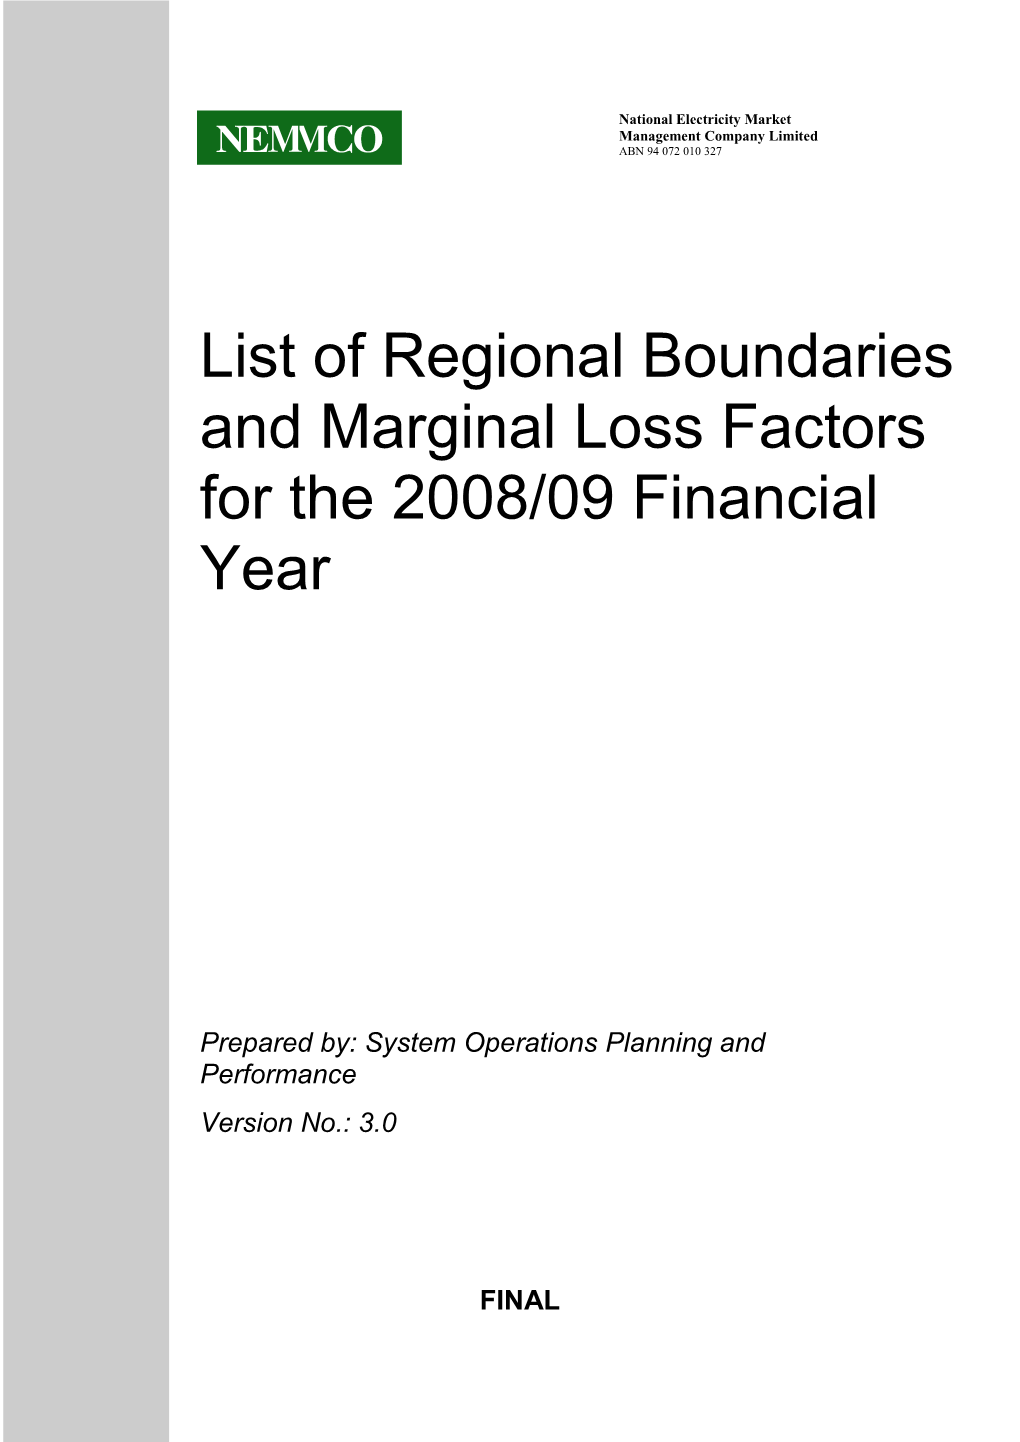 List of Regional Boundaries and Marginal Loss Factors for the 2008/09 Financial Year V3.0